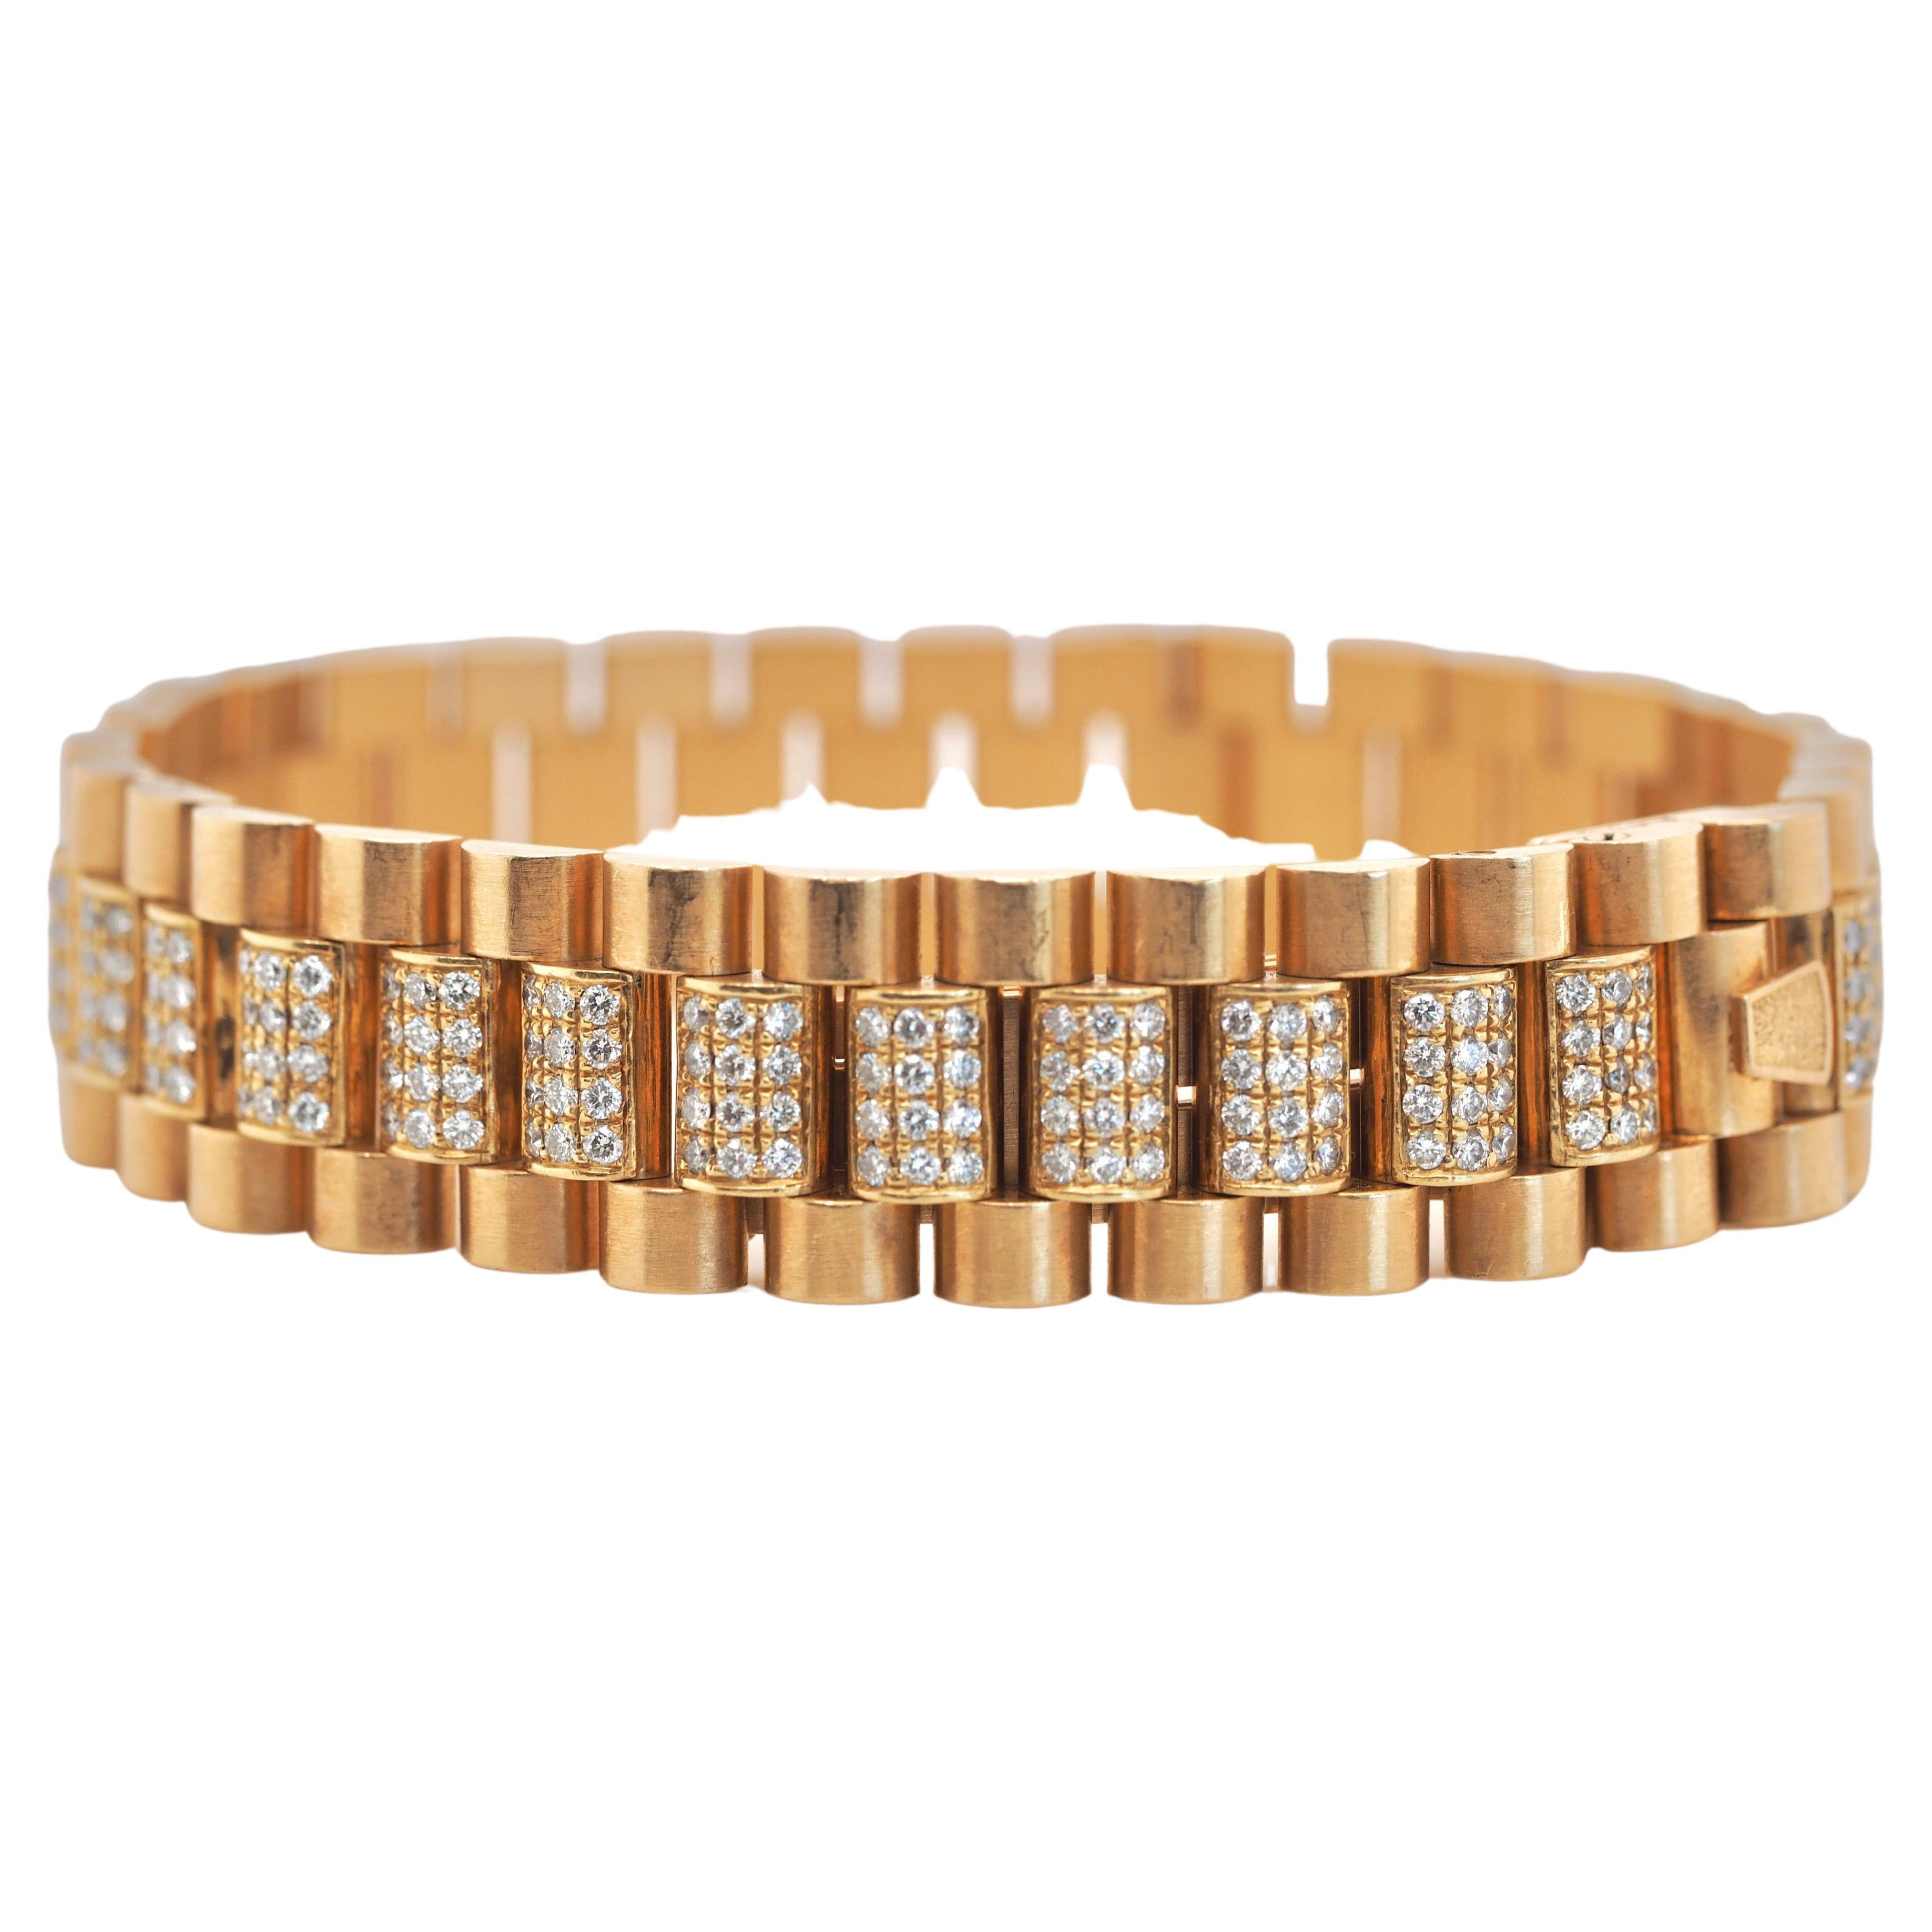 A stunning bracelet to layer and compliment your watch or a piece to carry all on it's own. Either way you wear it is a perfect staple for any occasion and any outfit. The bracelet is made in 18 karat yellow gold and has 6 carats of round brilliant